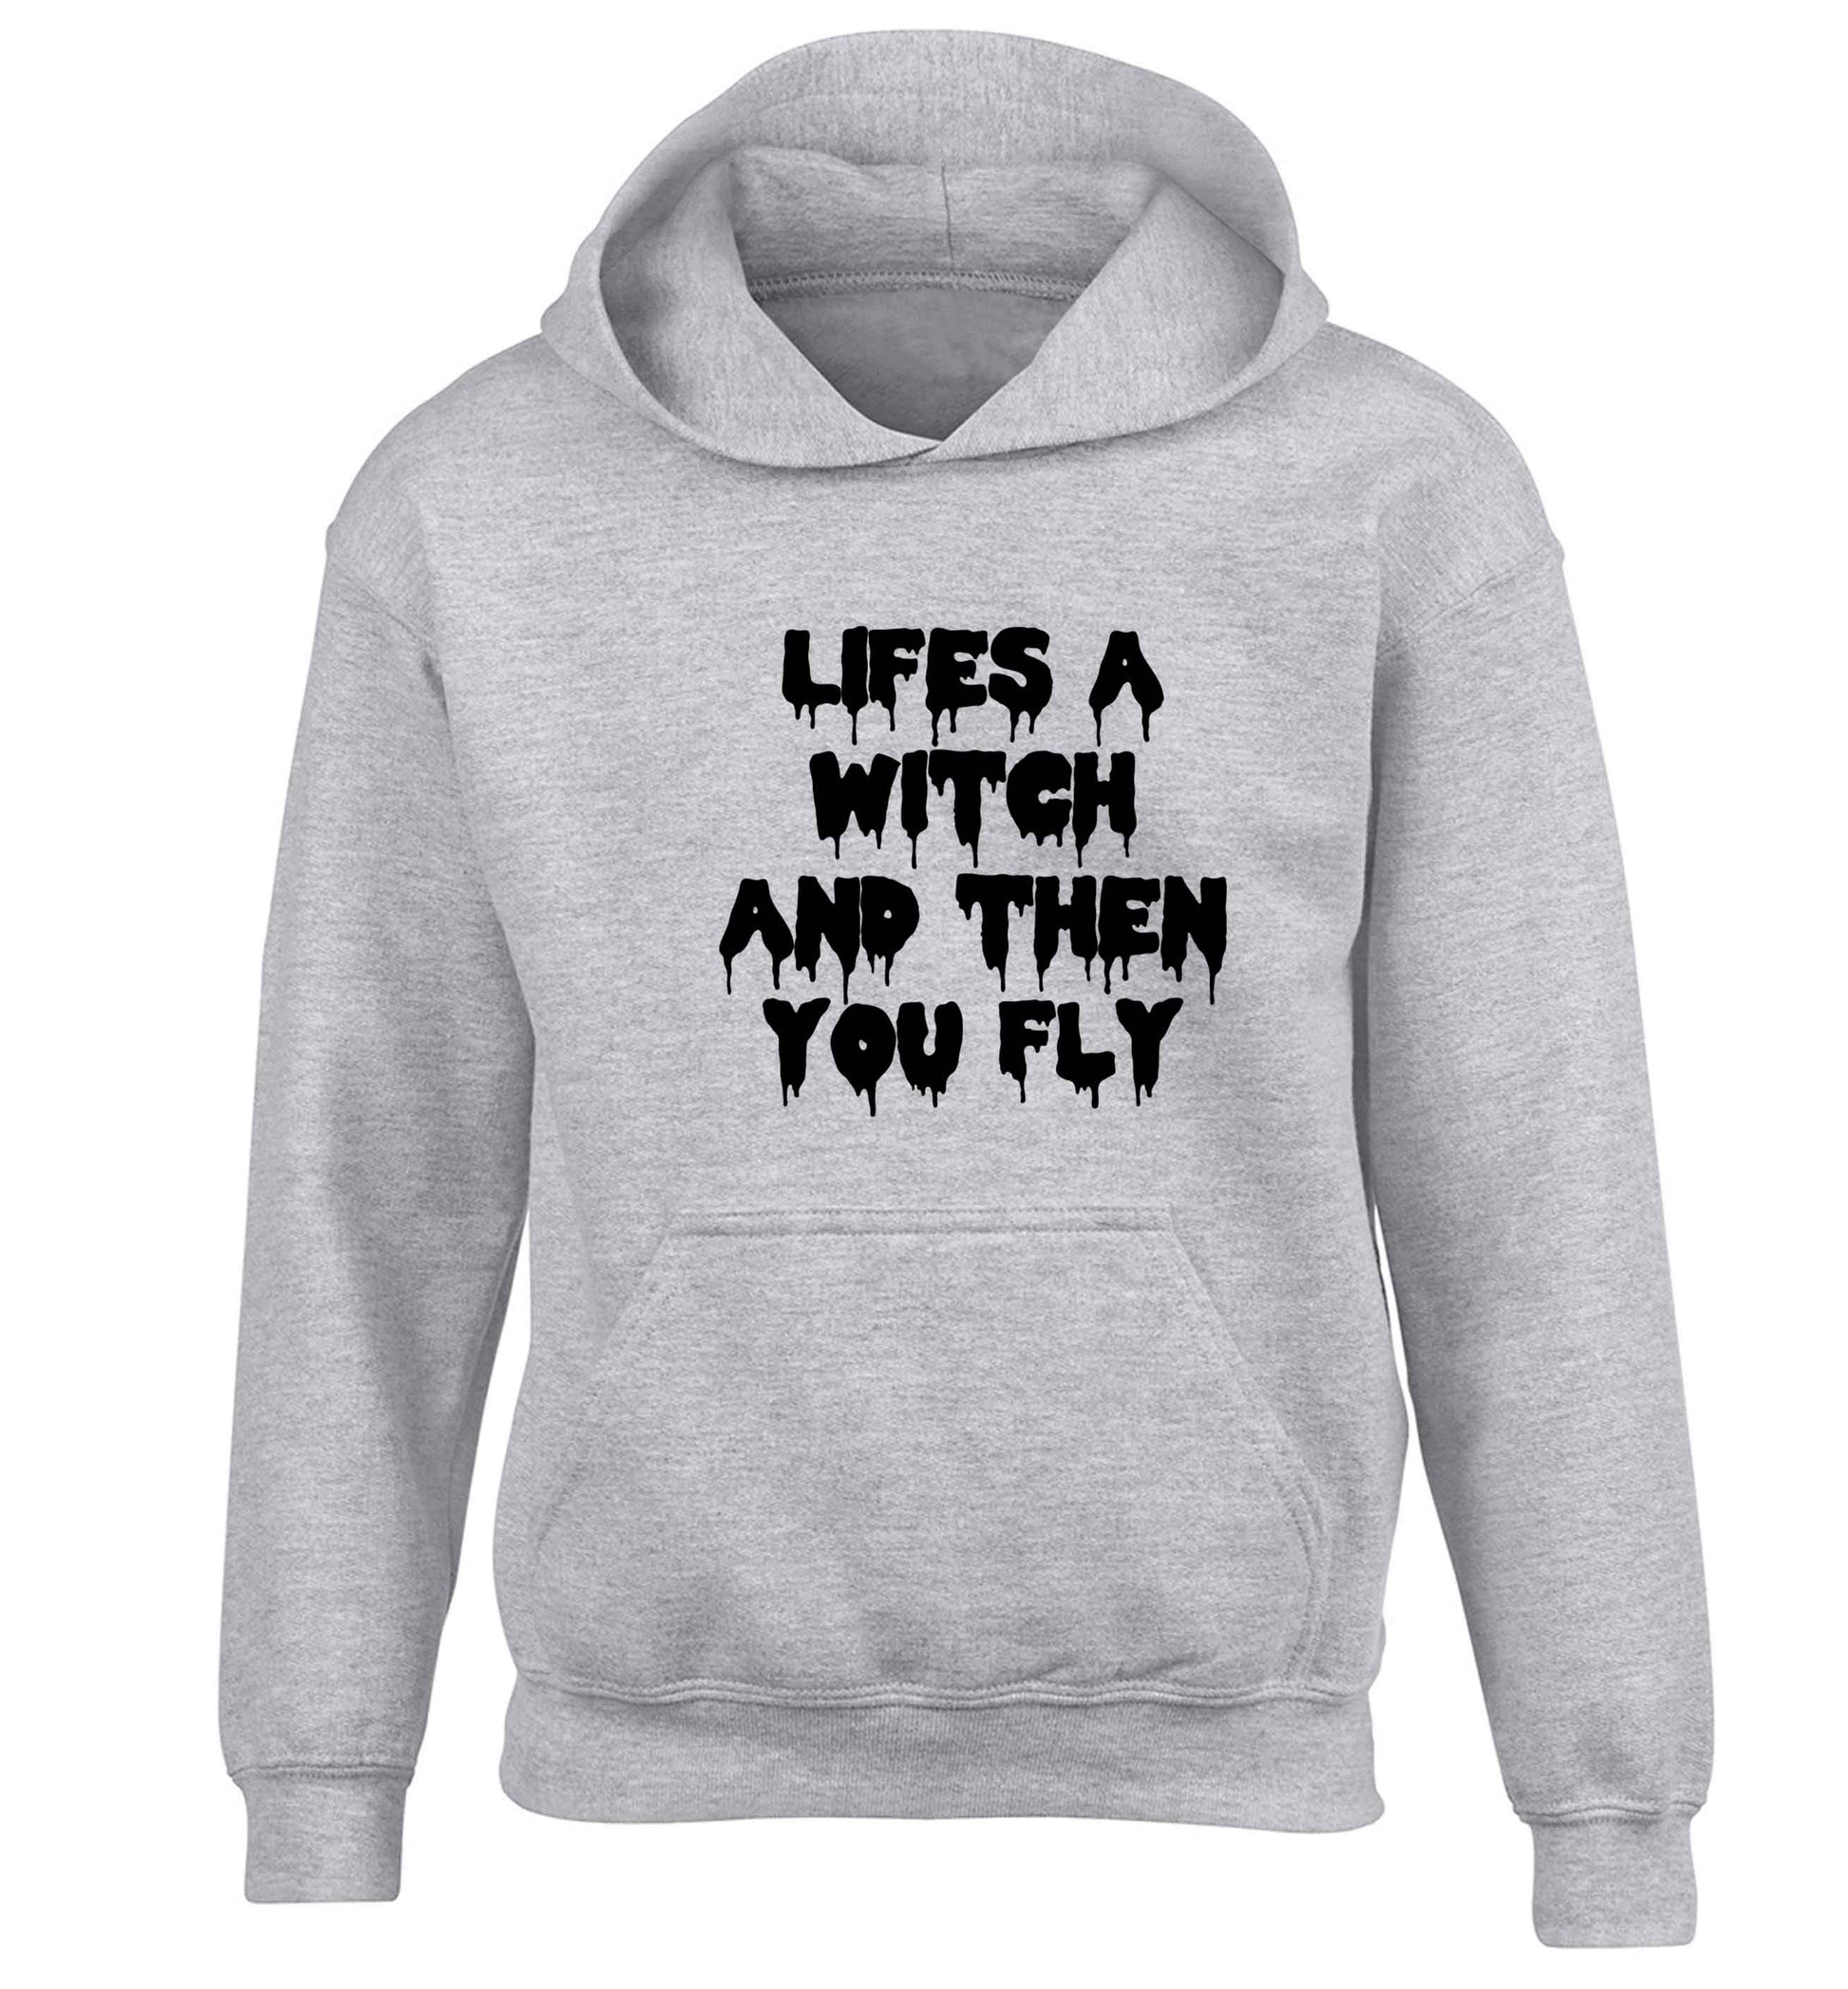 Life's a witch and then you fly children's grey hoodie 12-13 Years